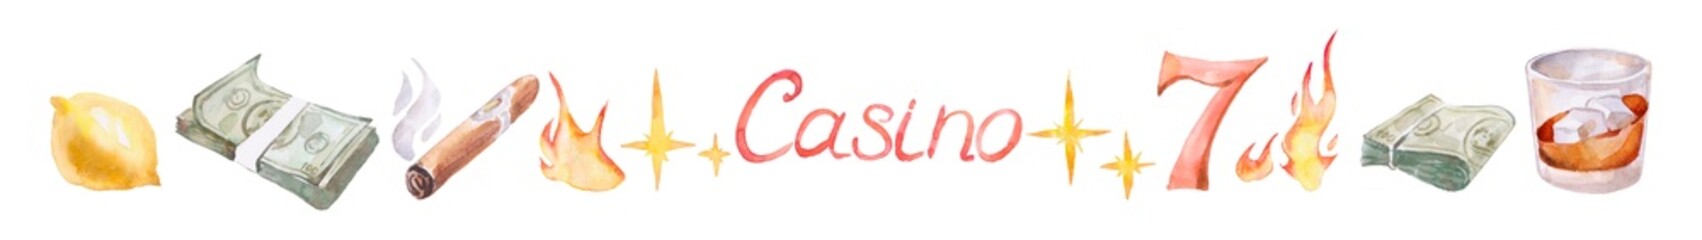 Casino icons on white background. Watercolor illustrations.